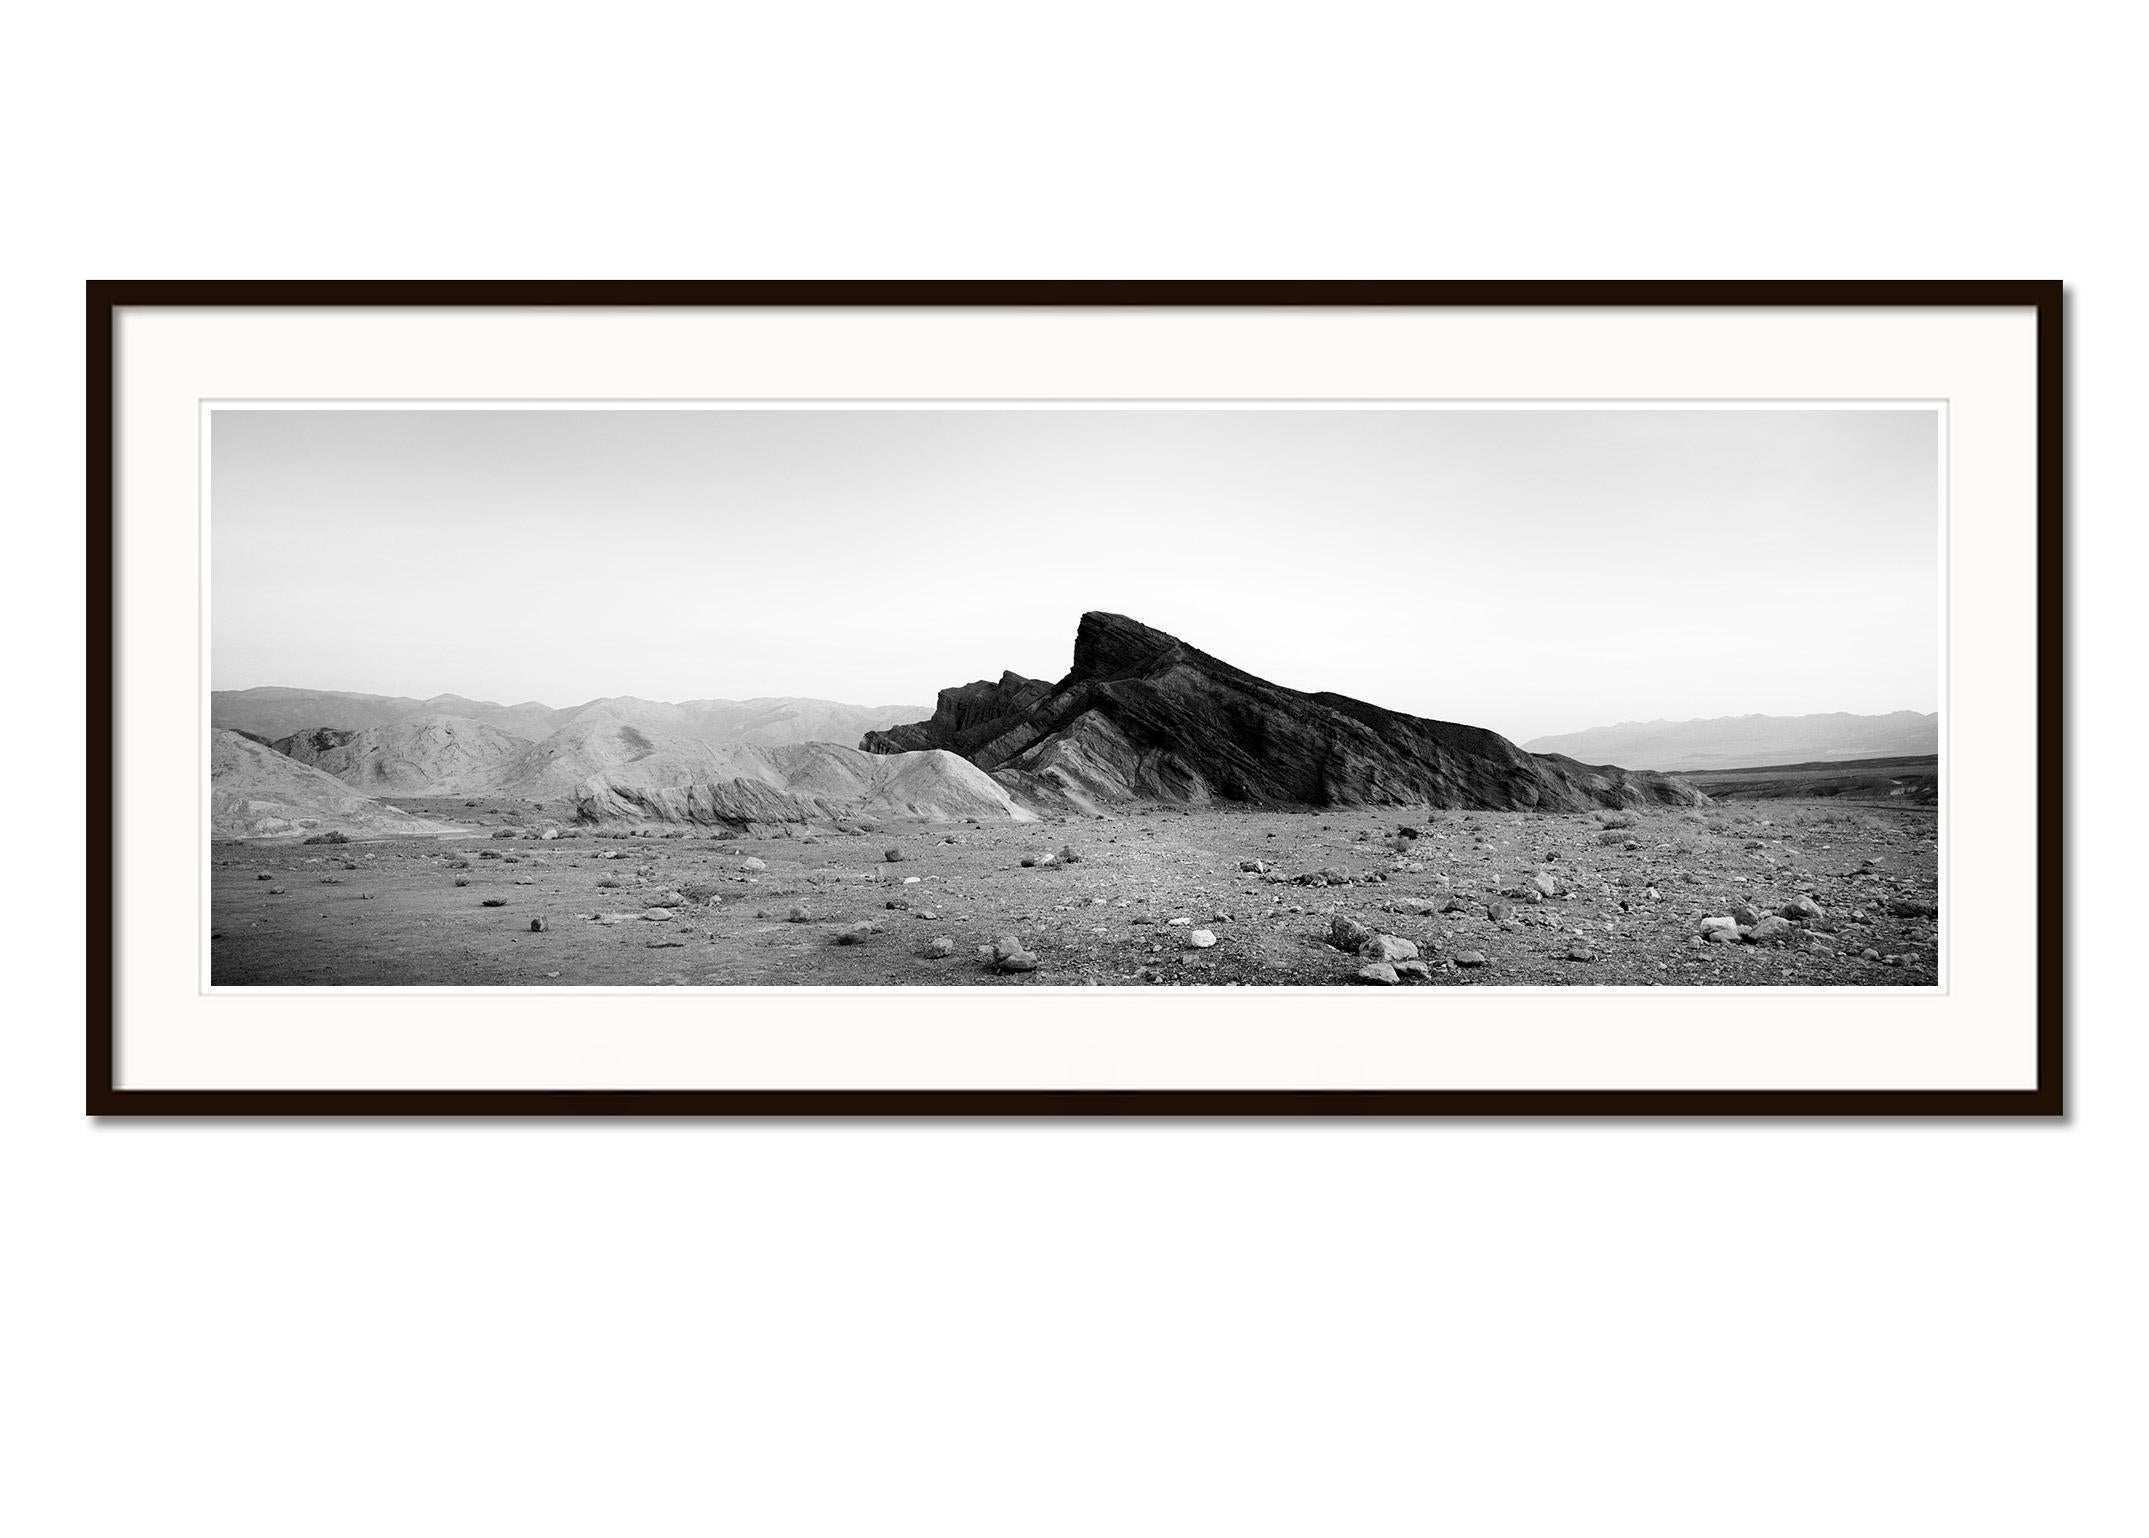 Black Rock, mountains, Death Valley, USA, black and white landscape photography - Gray Landscape Photograph by Gerald Berghammer